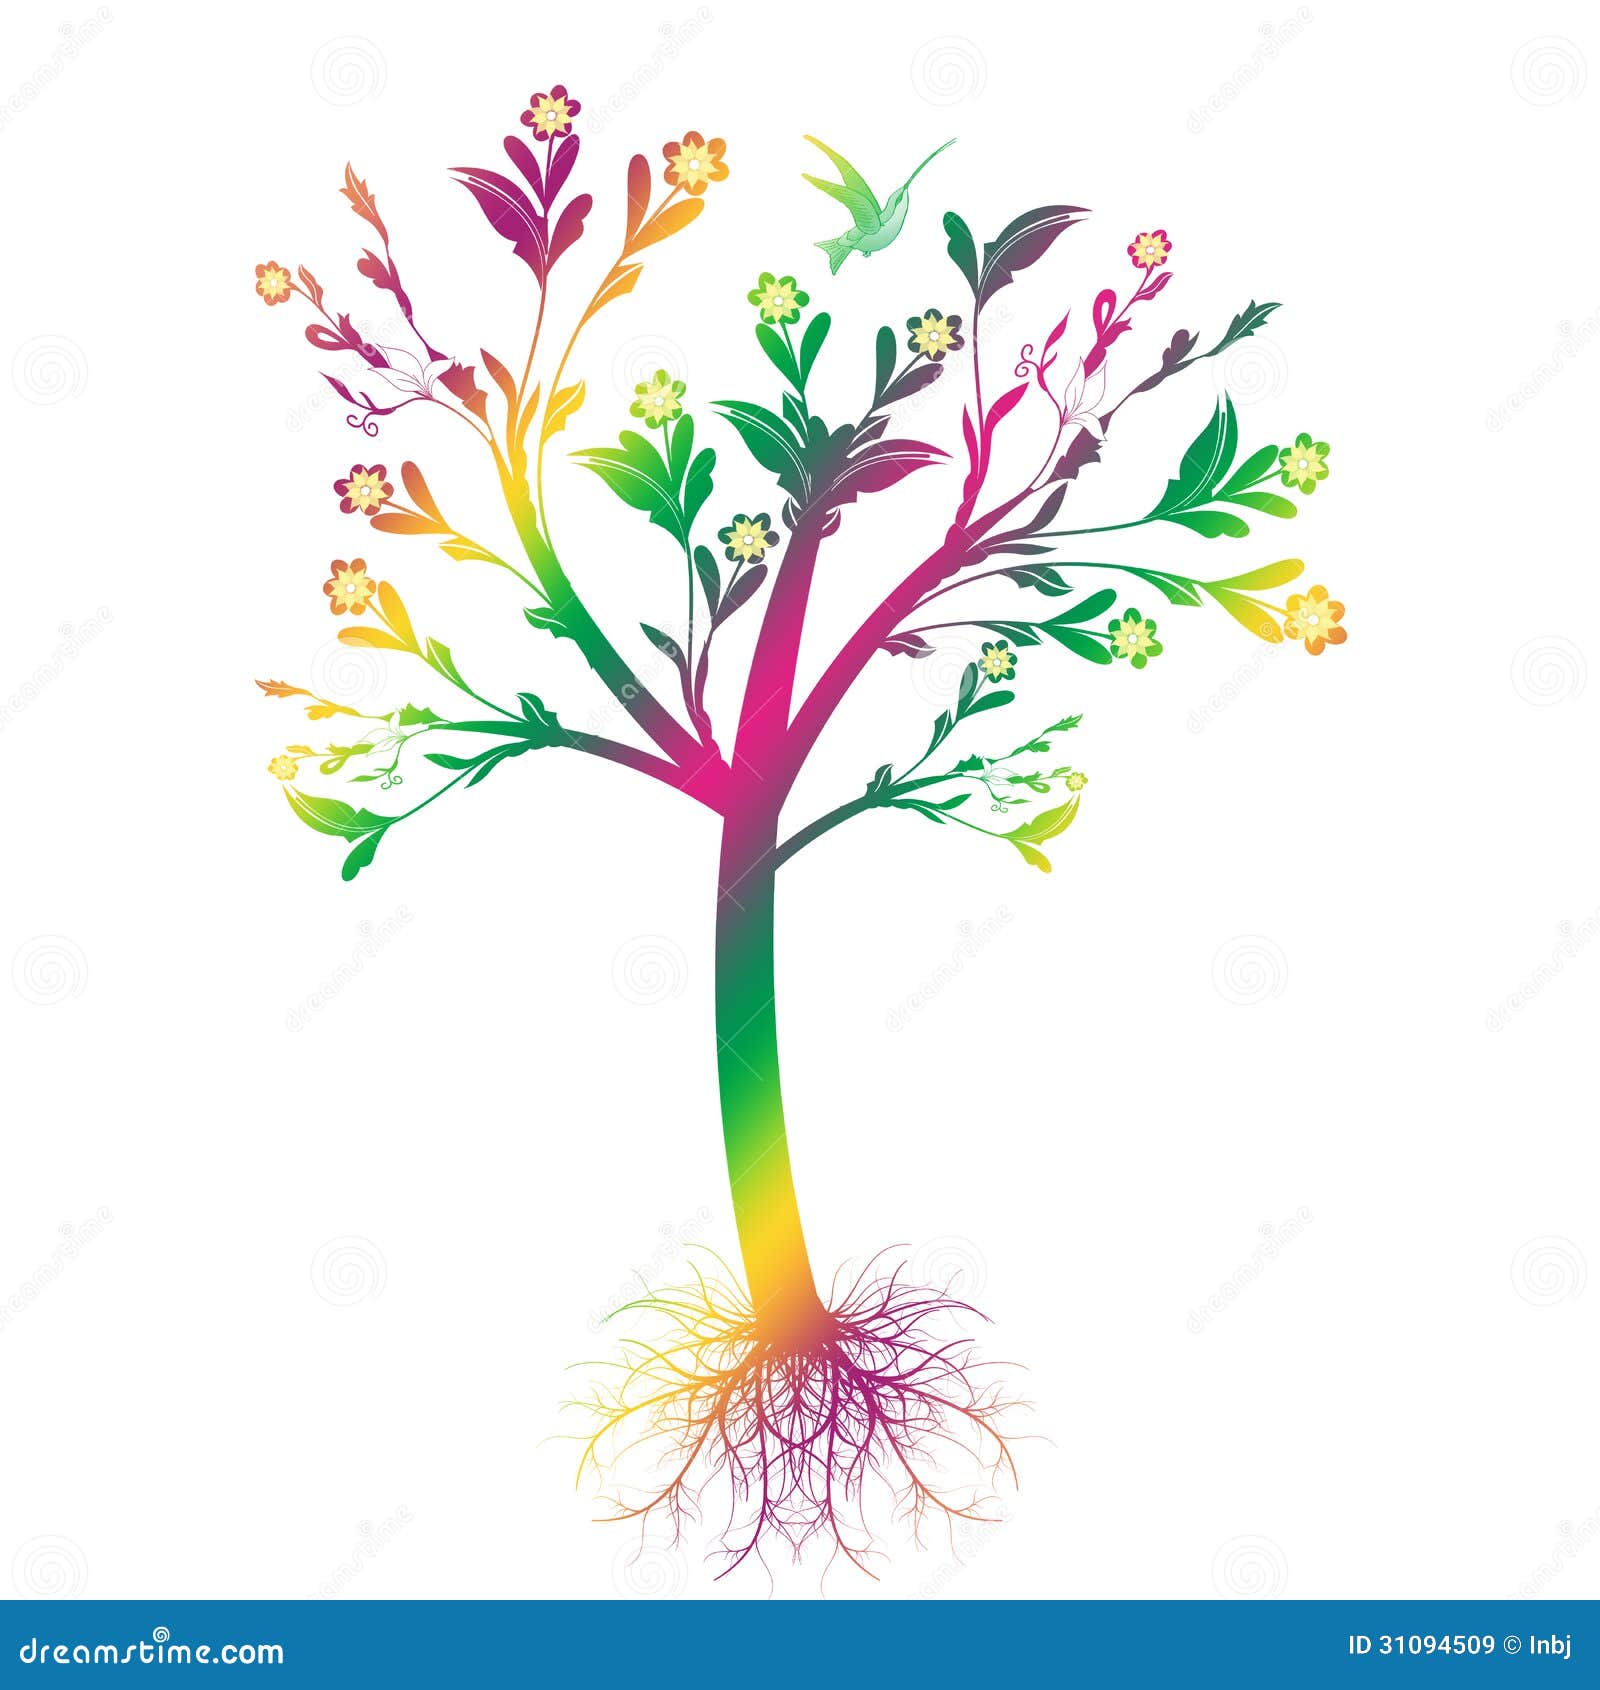 art-tree-colorful-roots-isolated-white-background-31094509.jpg